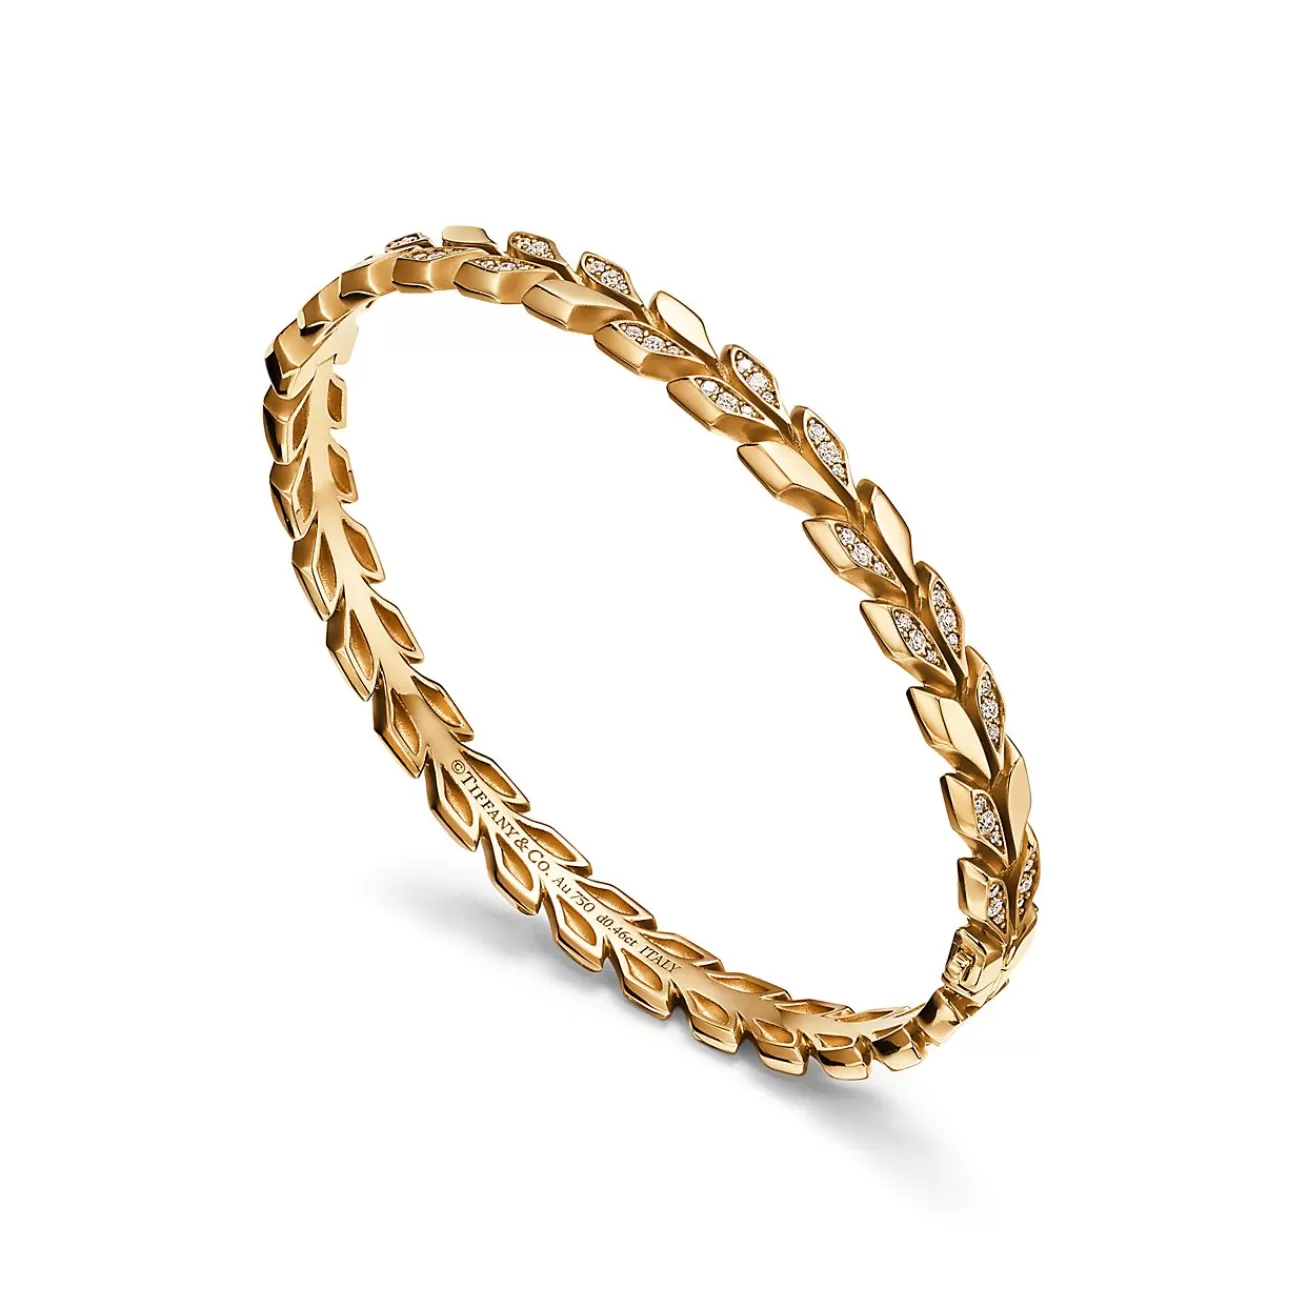 Tiffany & Co. Tiffany Victoria® Vine Hinged Bangle in Yellow Gold with Diamonds | ^ Bracelets | Gold Jewelry